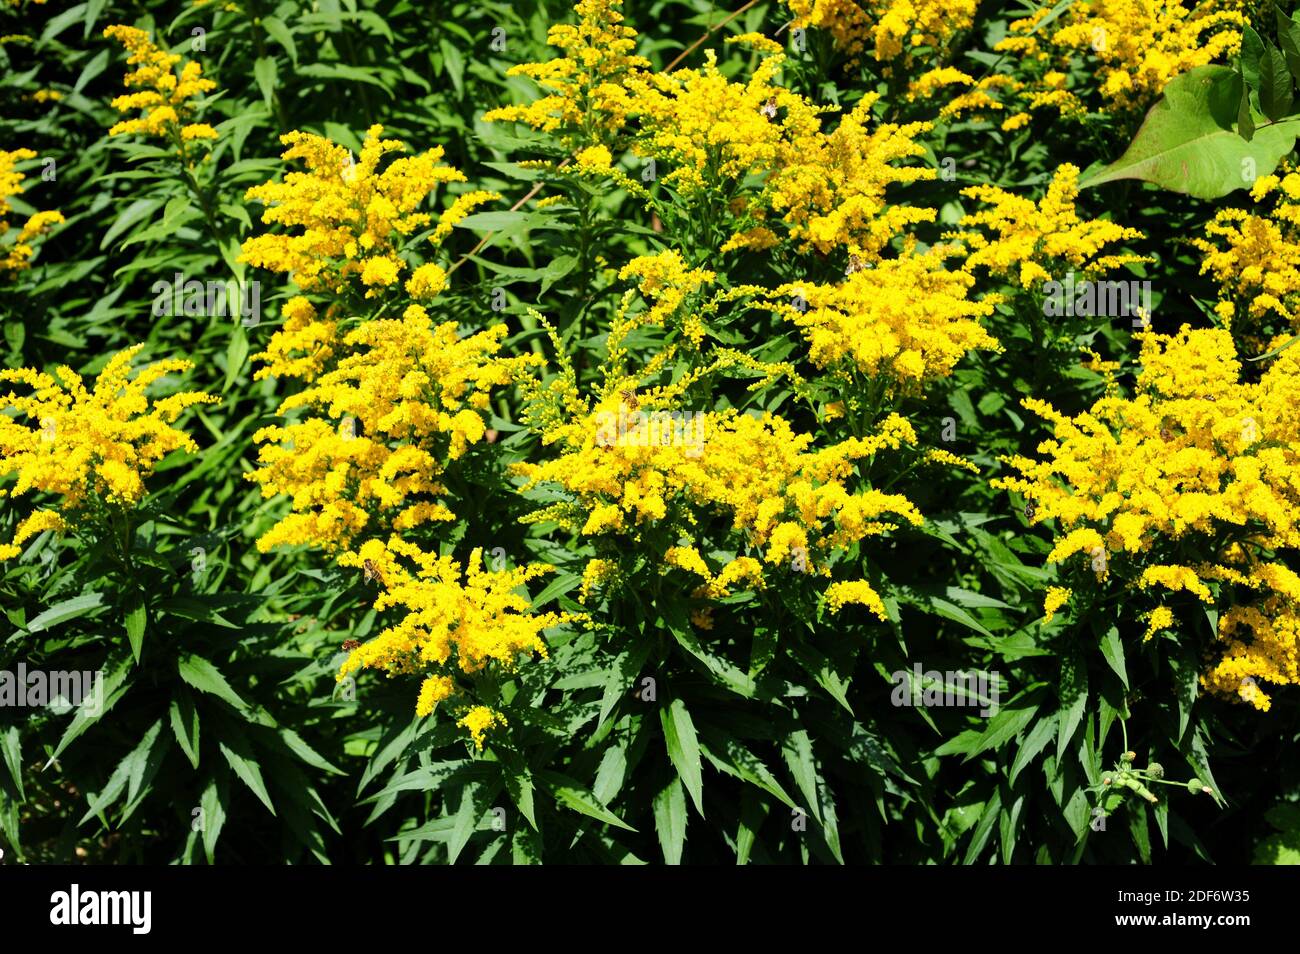 European goldenrod (Solidago virgaurea) is a perennial herb native to Eurasia and north Africa. Flowering plants. Stock Photo